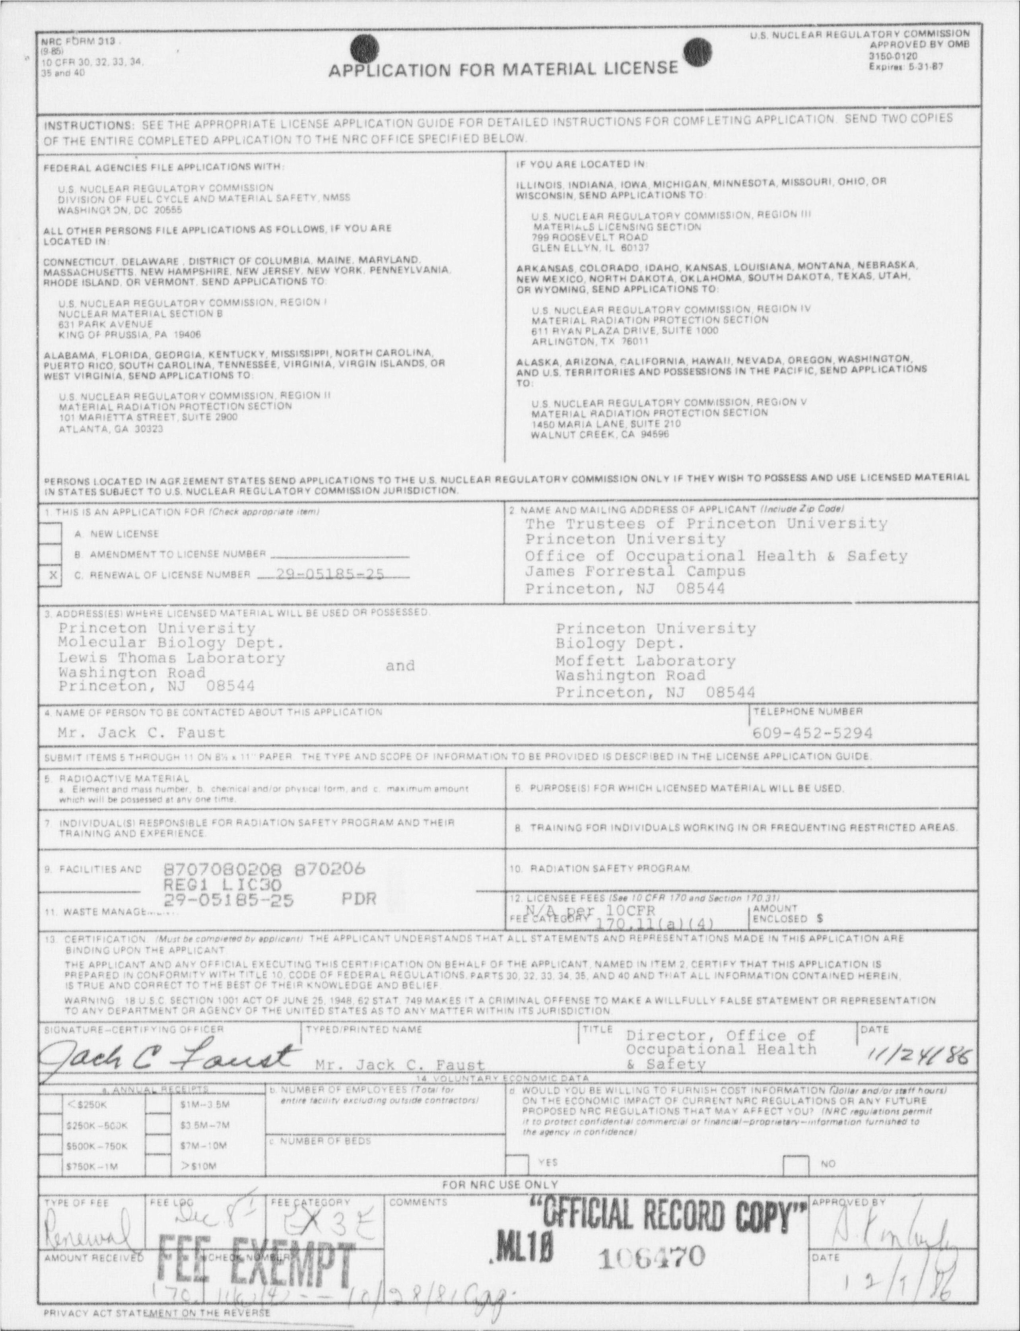 Application for Renewal of License 29-05185-25,Authorizing Use Of